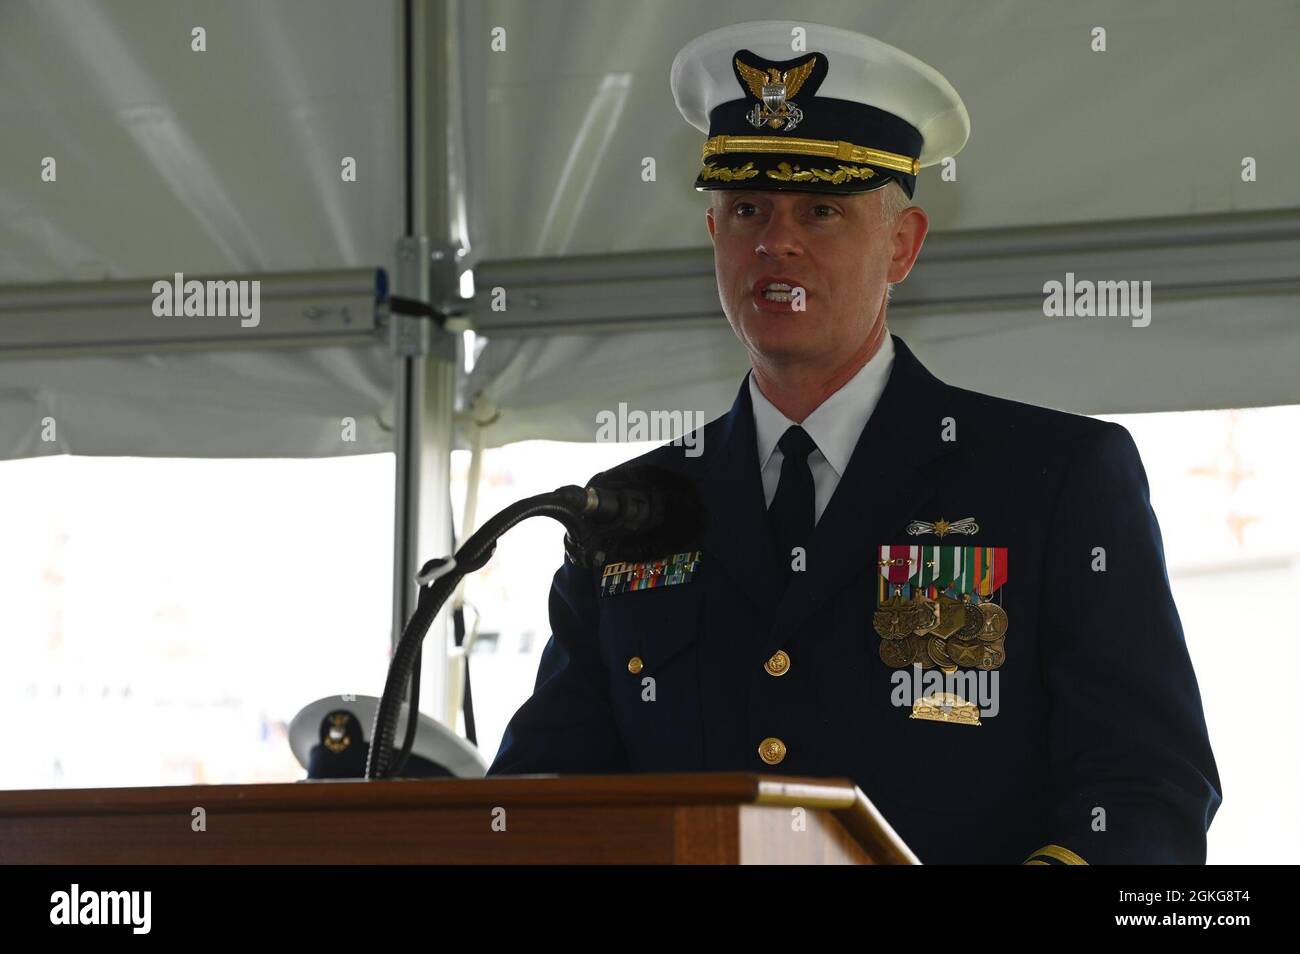 Capt. Jonathan Theel, Commanding Officer of Coast Guard Sector Delaware Bay, addresses the crowd during the official decommissioning ceremony of Coast Guard Cutter Shearwater at Coast Guard Training Center Cape May, New Jersey, April 15, 2021. Coast Guard Cutter Shearwater was the 49th vessel of the Marine Protector Class of Coast Guard Patrol Boats. Stock Photo